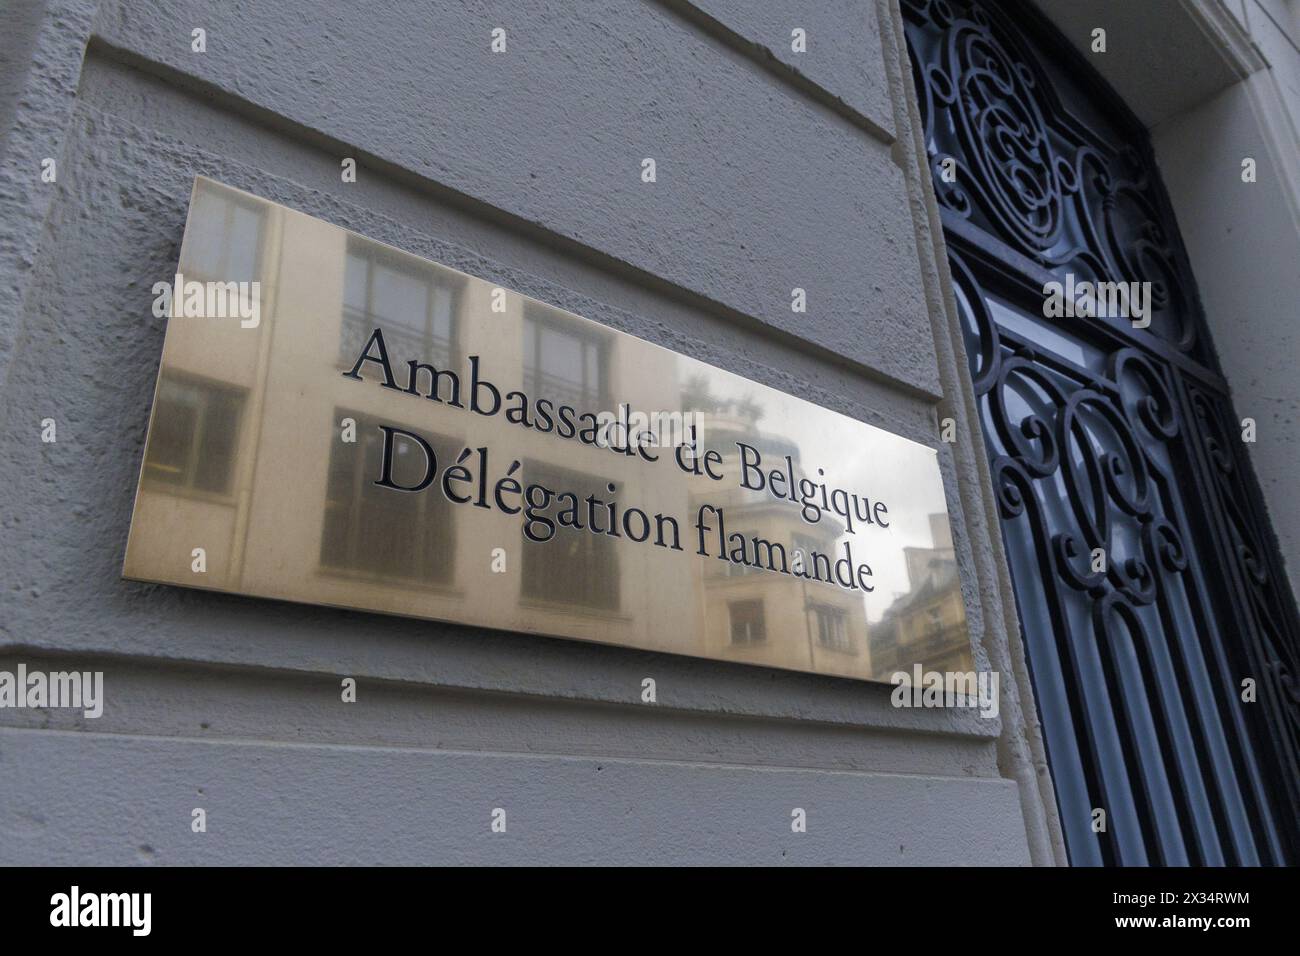 Paris, France. 24th Apr, 2024. A sign reads 'Ambassade de Belgique' 'Delegation flamande', is seen at the Flemish house during an industrial mission to France, in Paris, Wednesday 24 April 2024. A delegation of Flemish politicians, officials and industrial leaders are visiting France to discuss innovation and sustainability. BELGA PHOTO NICOLAS MAETERLINCK Credit: Belga News Agency/Alamy Live News Stock Photo